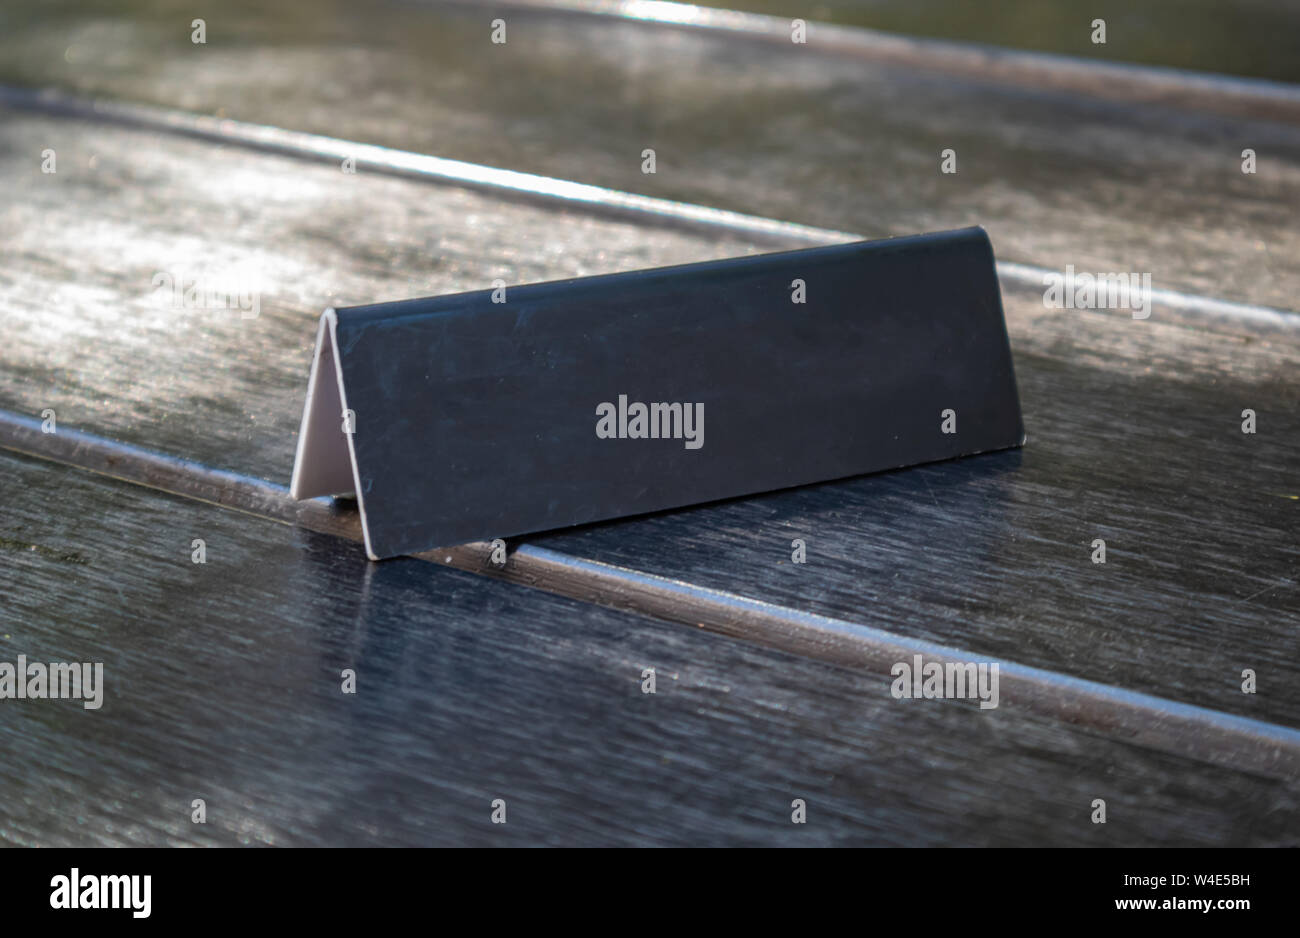 Blank reserved sign, reservation concept. Metal black color plate mockup template on wooden table, copy space. Close up view with details Stock Photo